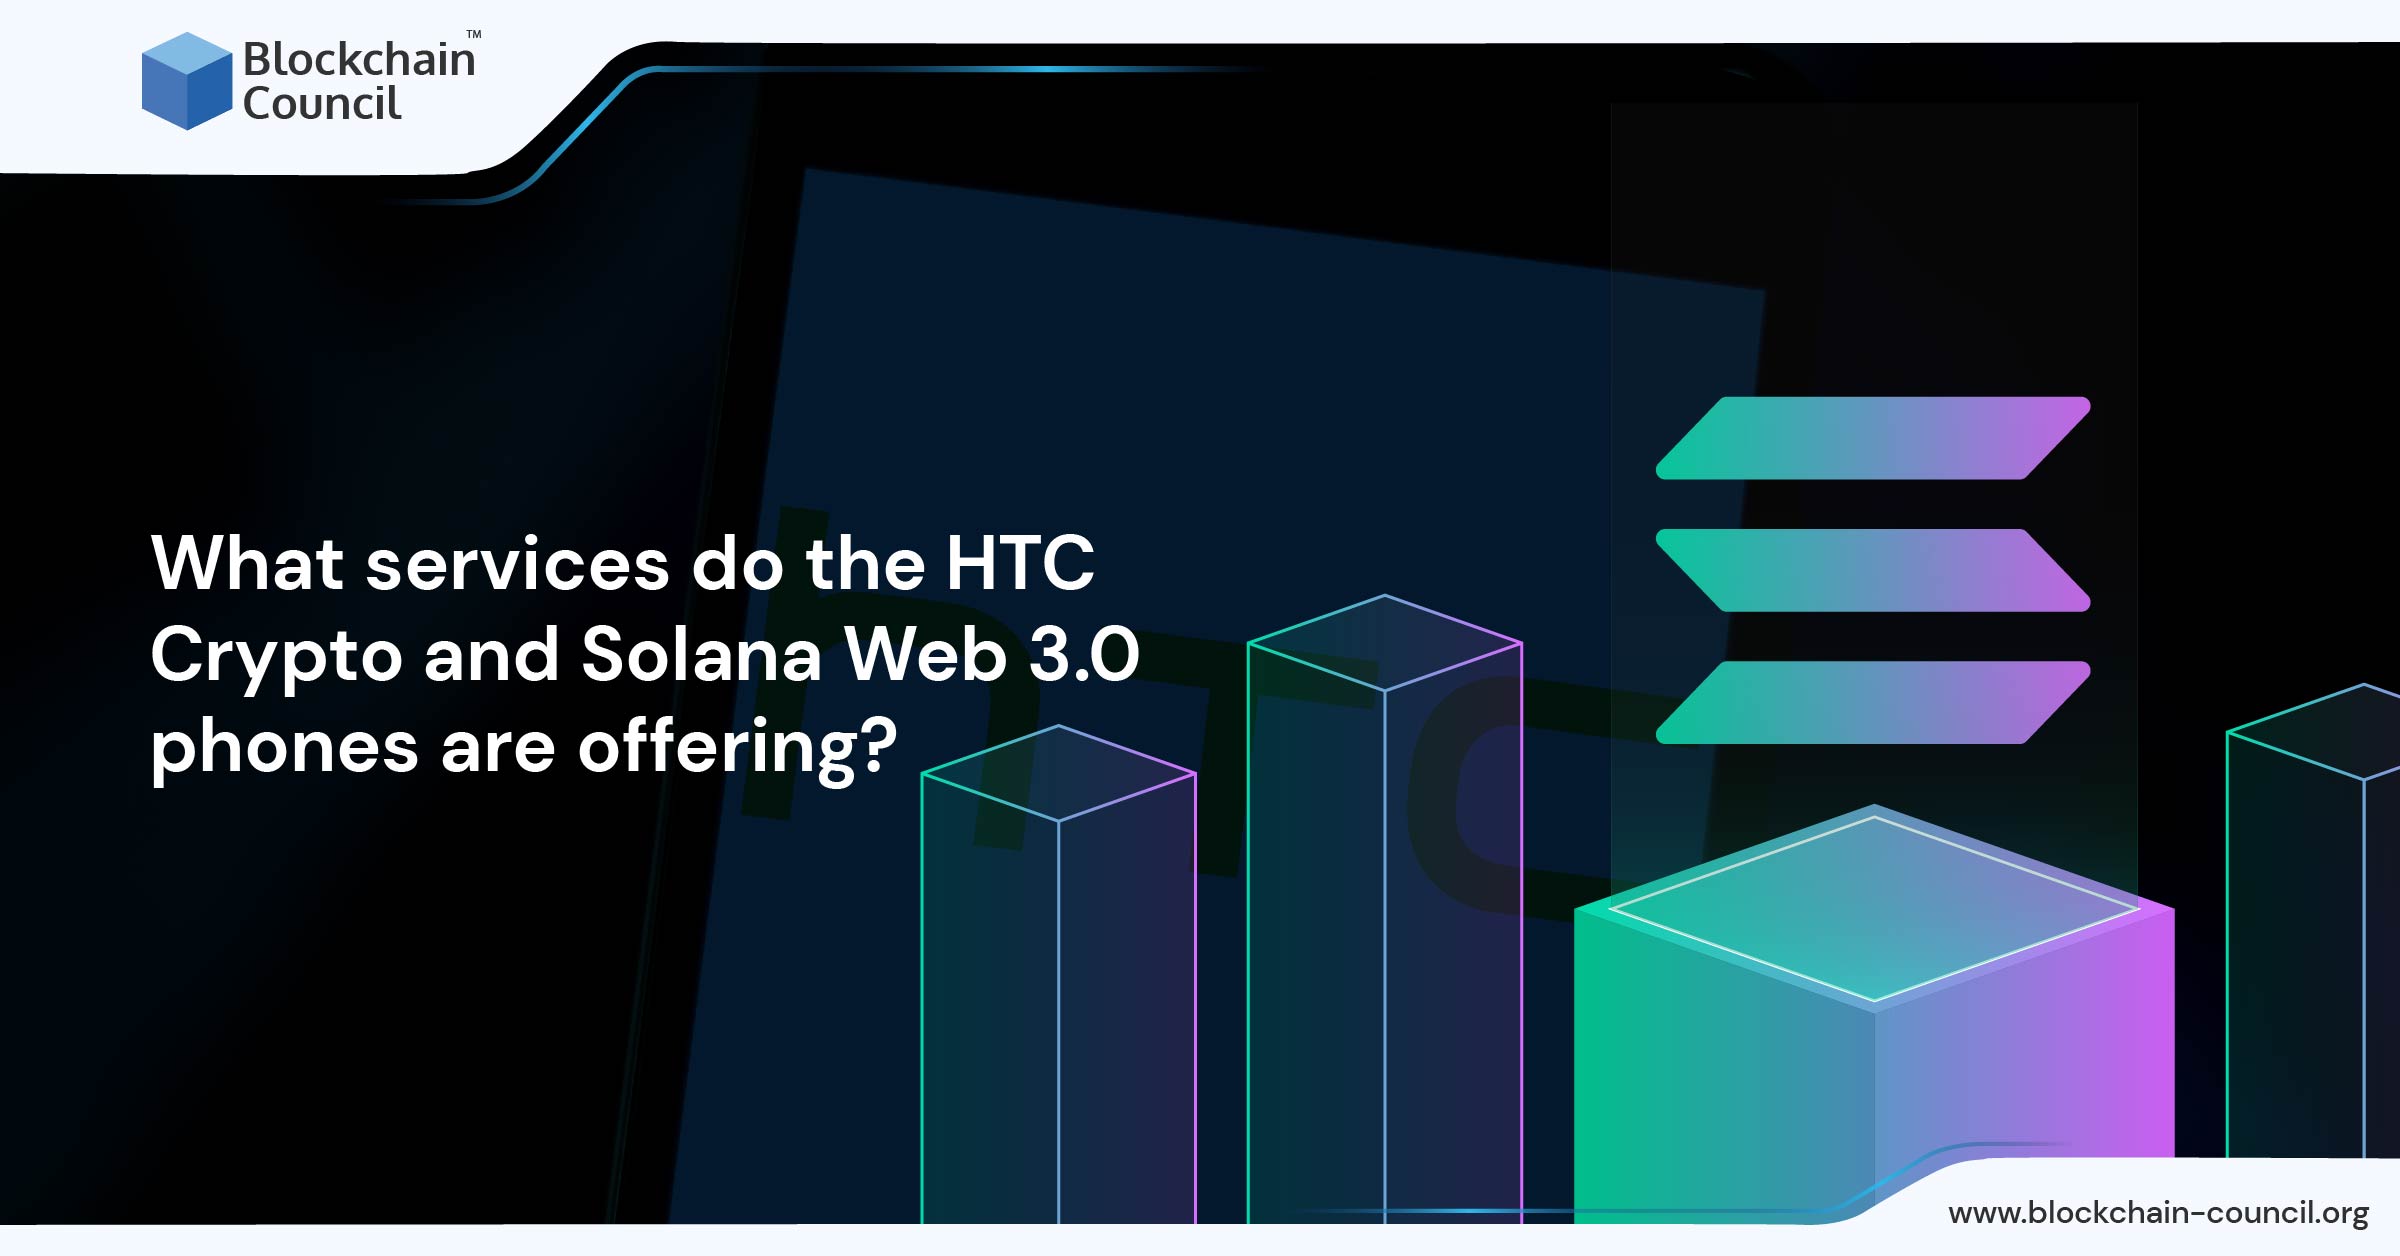 What services do the HTC Crypto and Solana Web 3.0 phones are offering